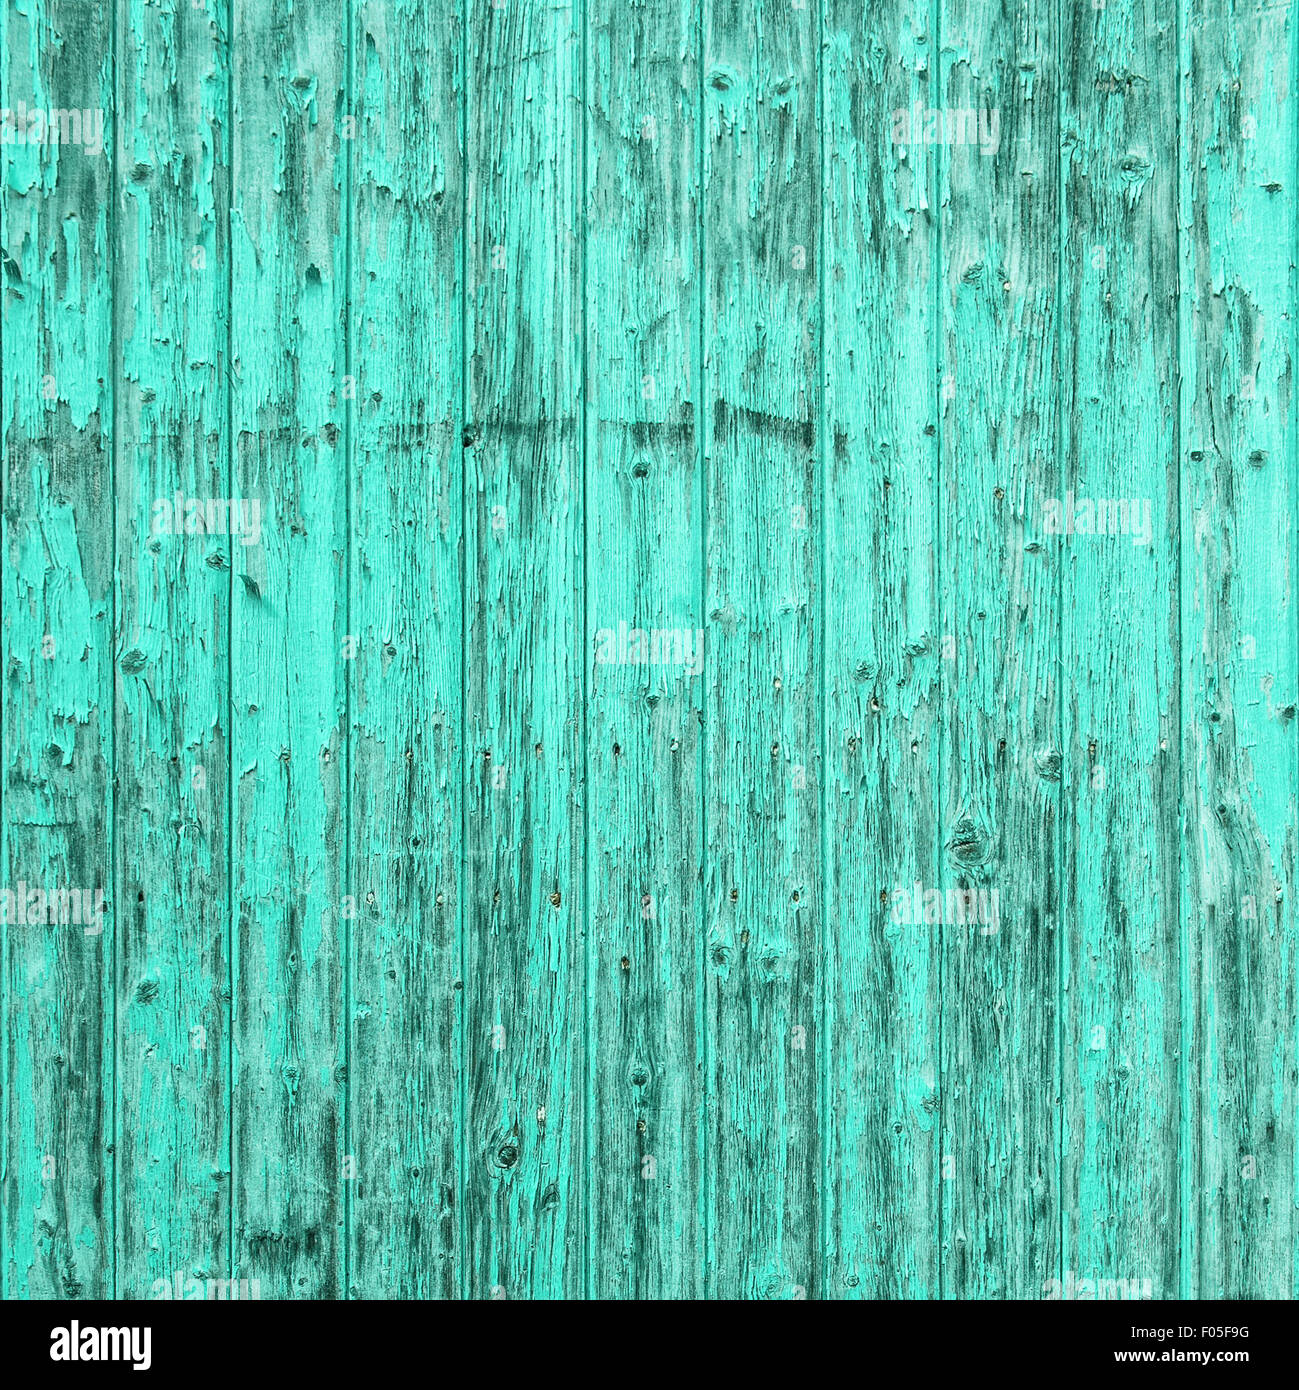 Old turquoise blue wooden background. Shabby chic wallpaper texture Stock Photo